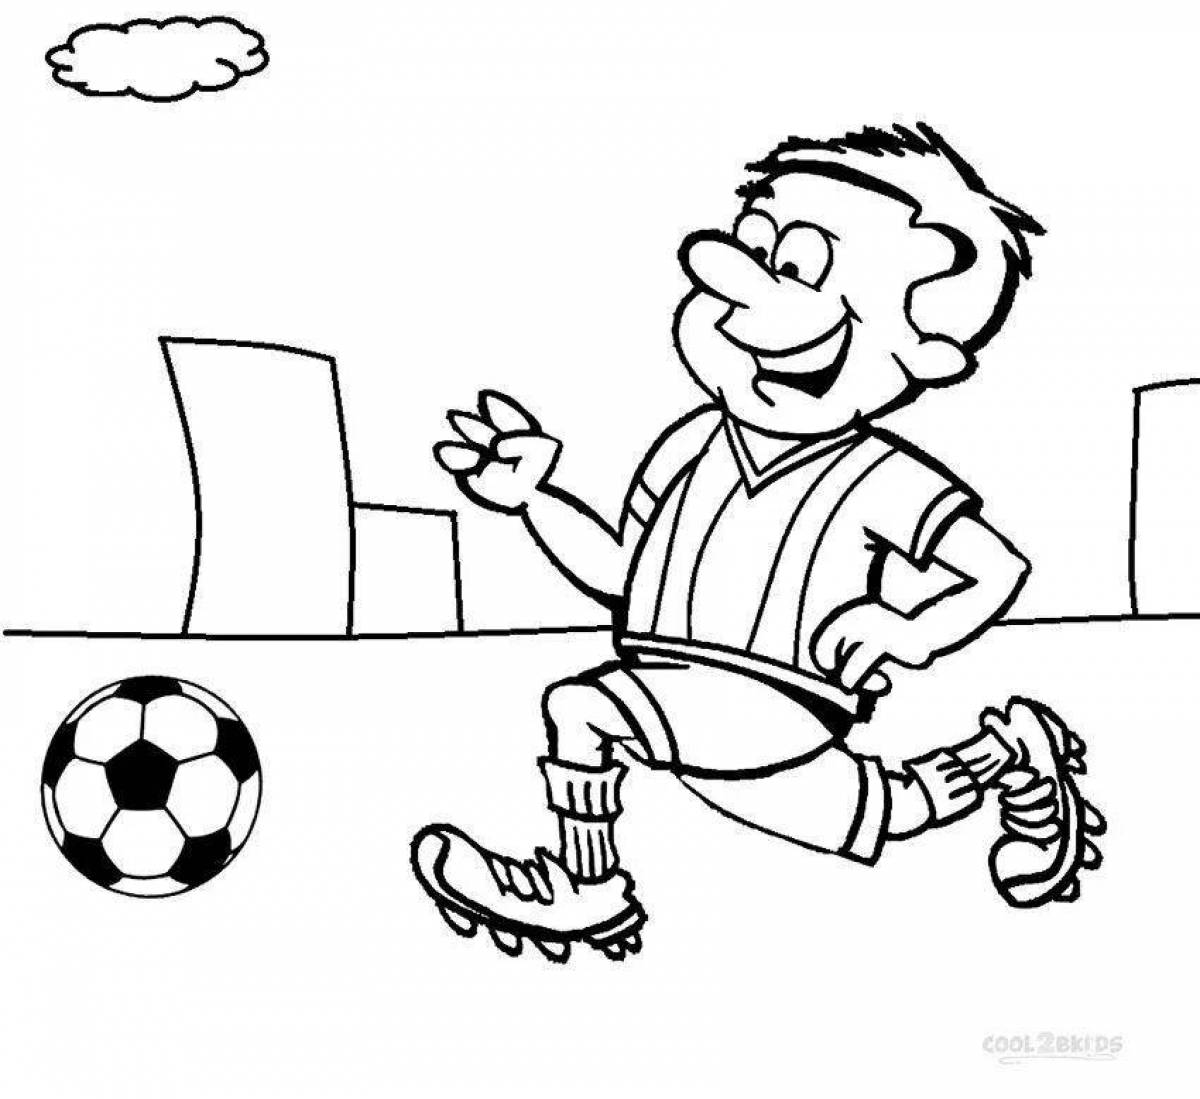 Animated soccer player coloring page for kids